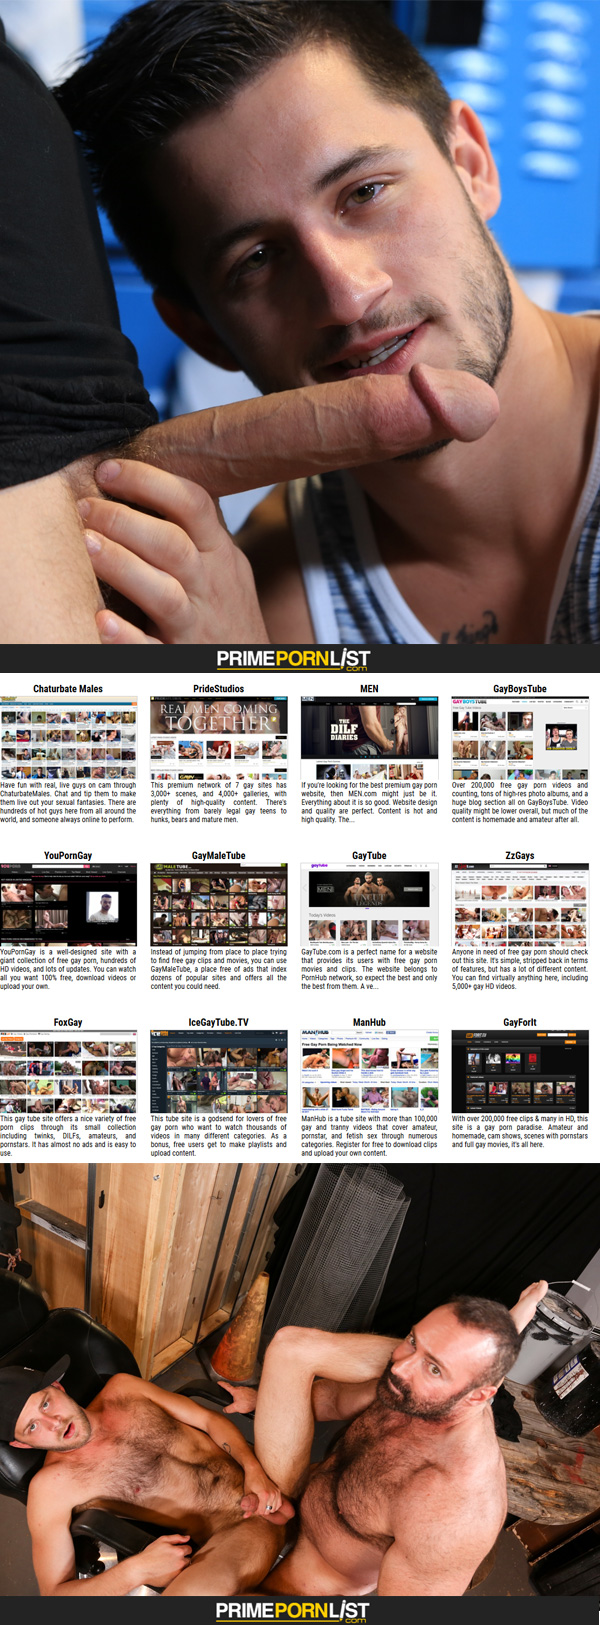 Prime Porn List - Your Favorites Sites Ranked and Categorized